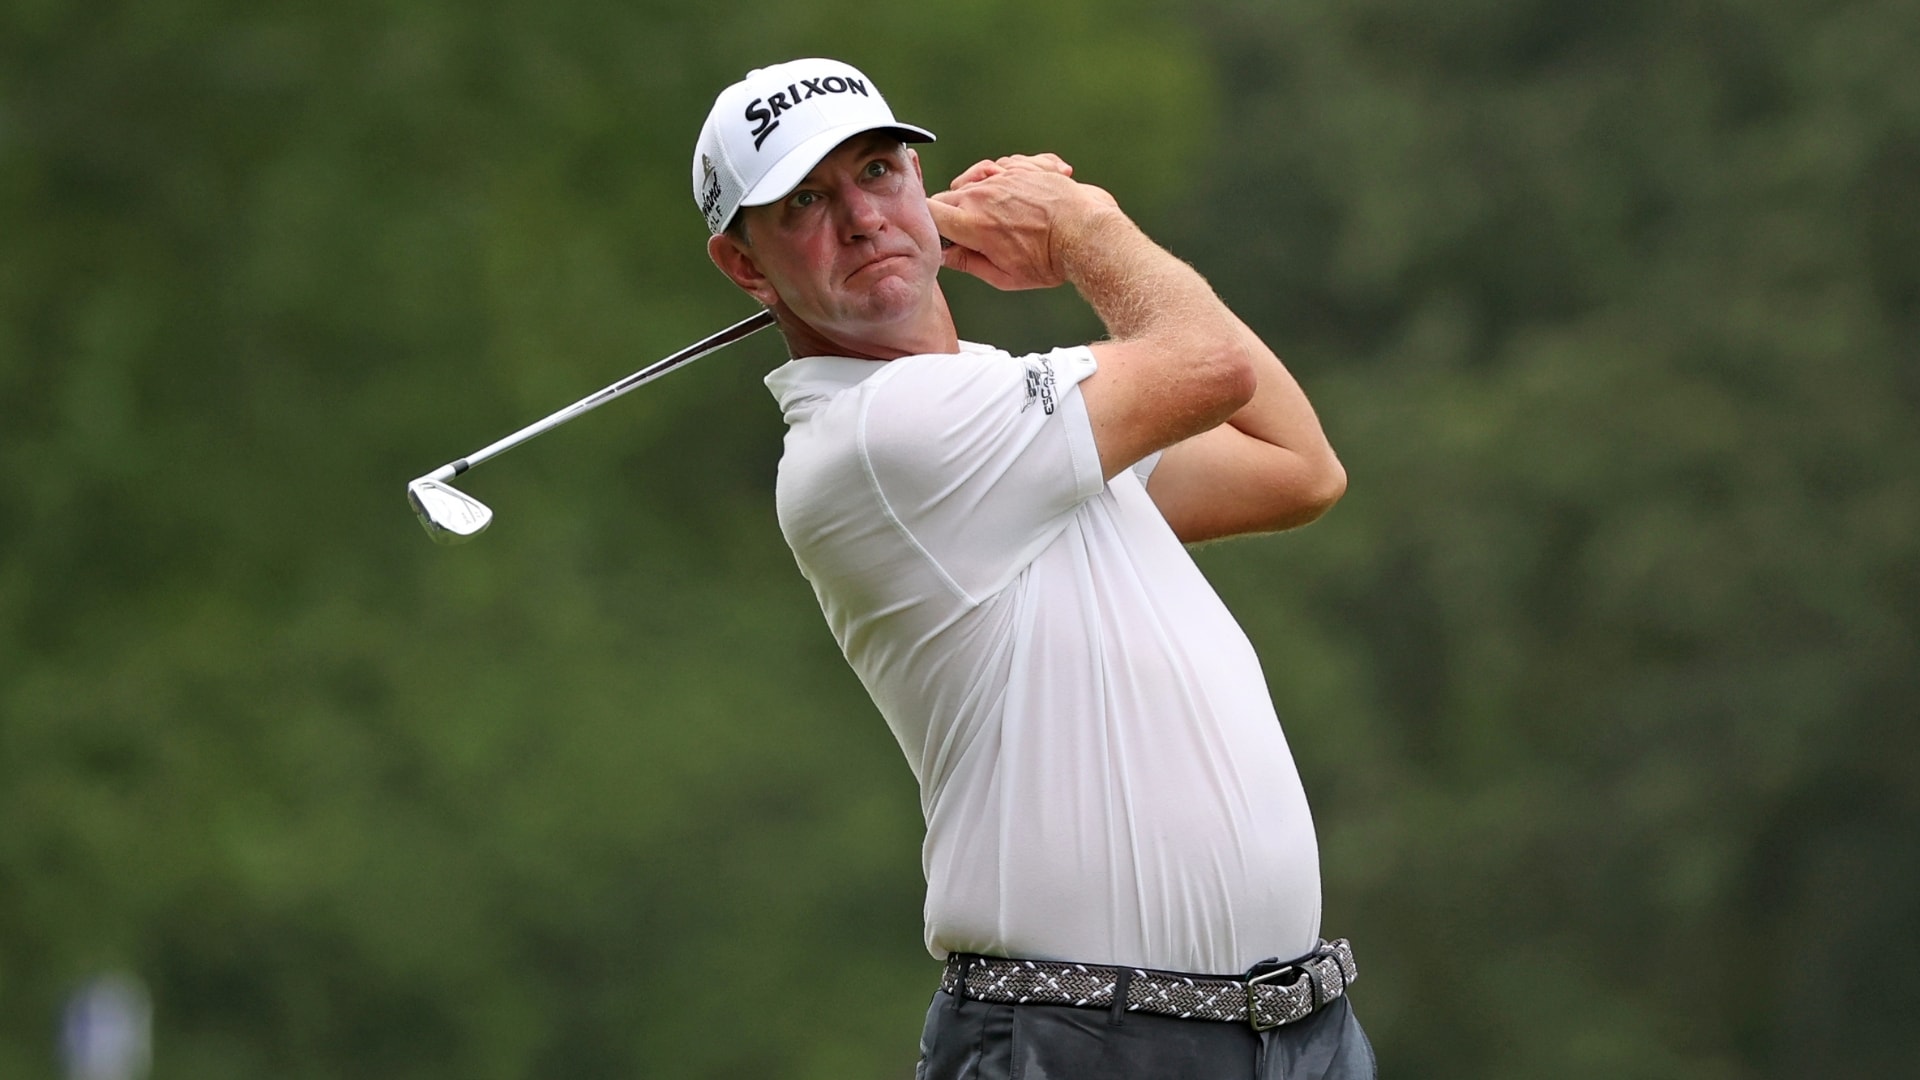 Lucas Glover posts another low round to lead FedExCup opener by a stroke